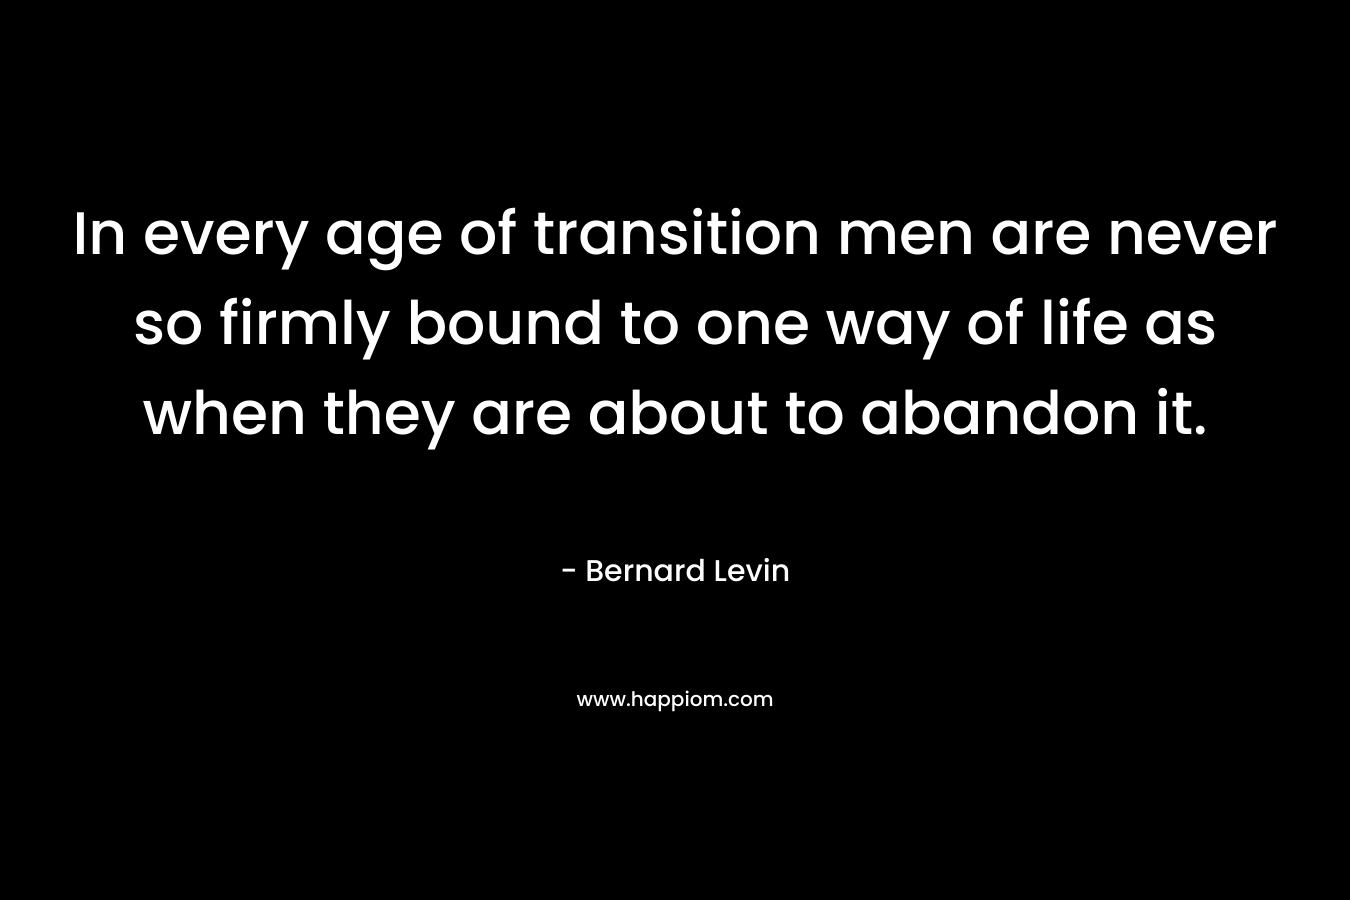 In every age of transition men are never so firmly bound to one way of life as when they are about to abandon it.